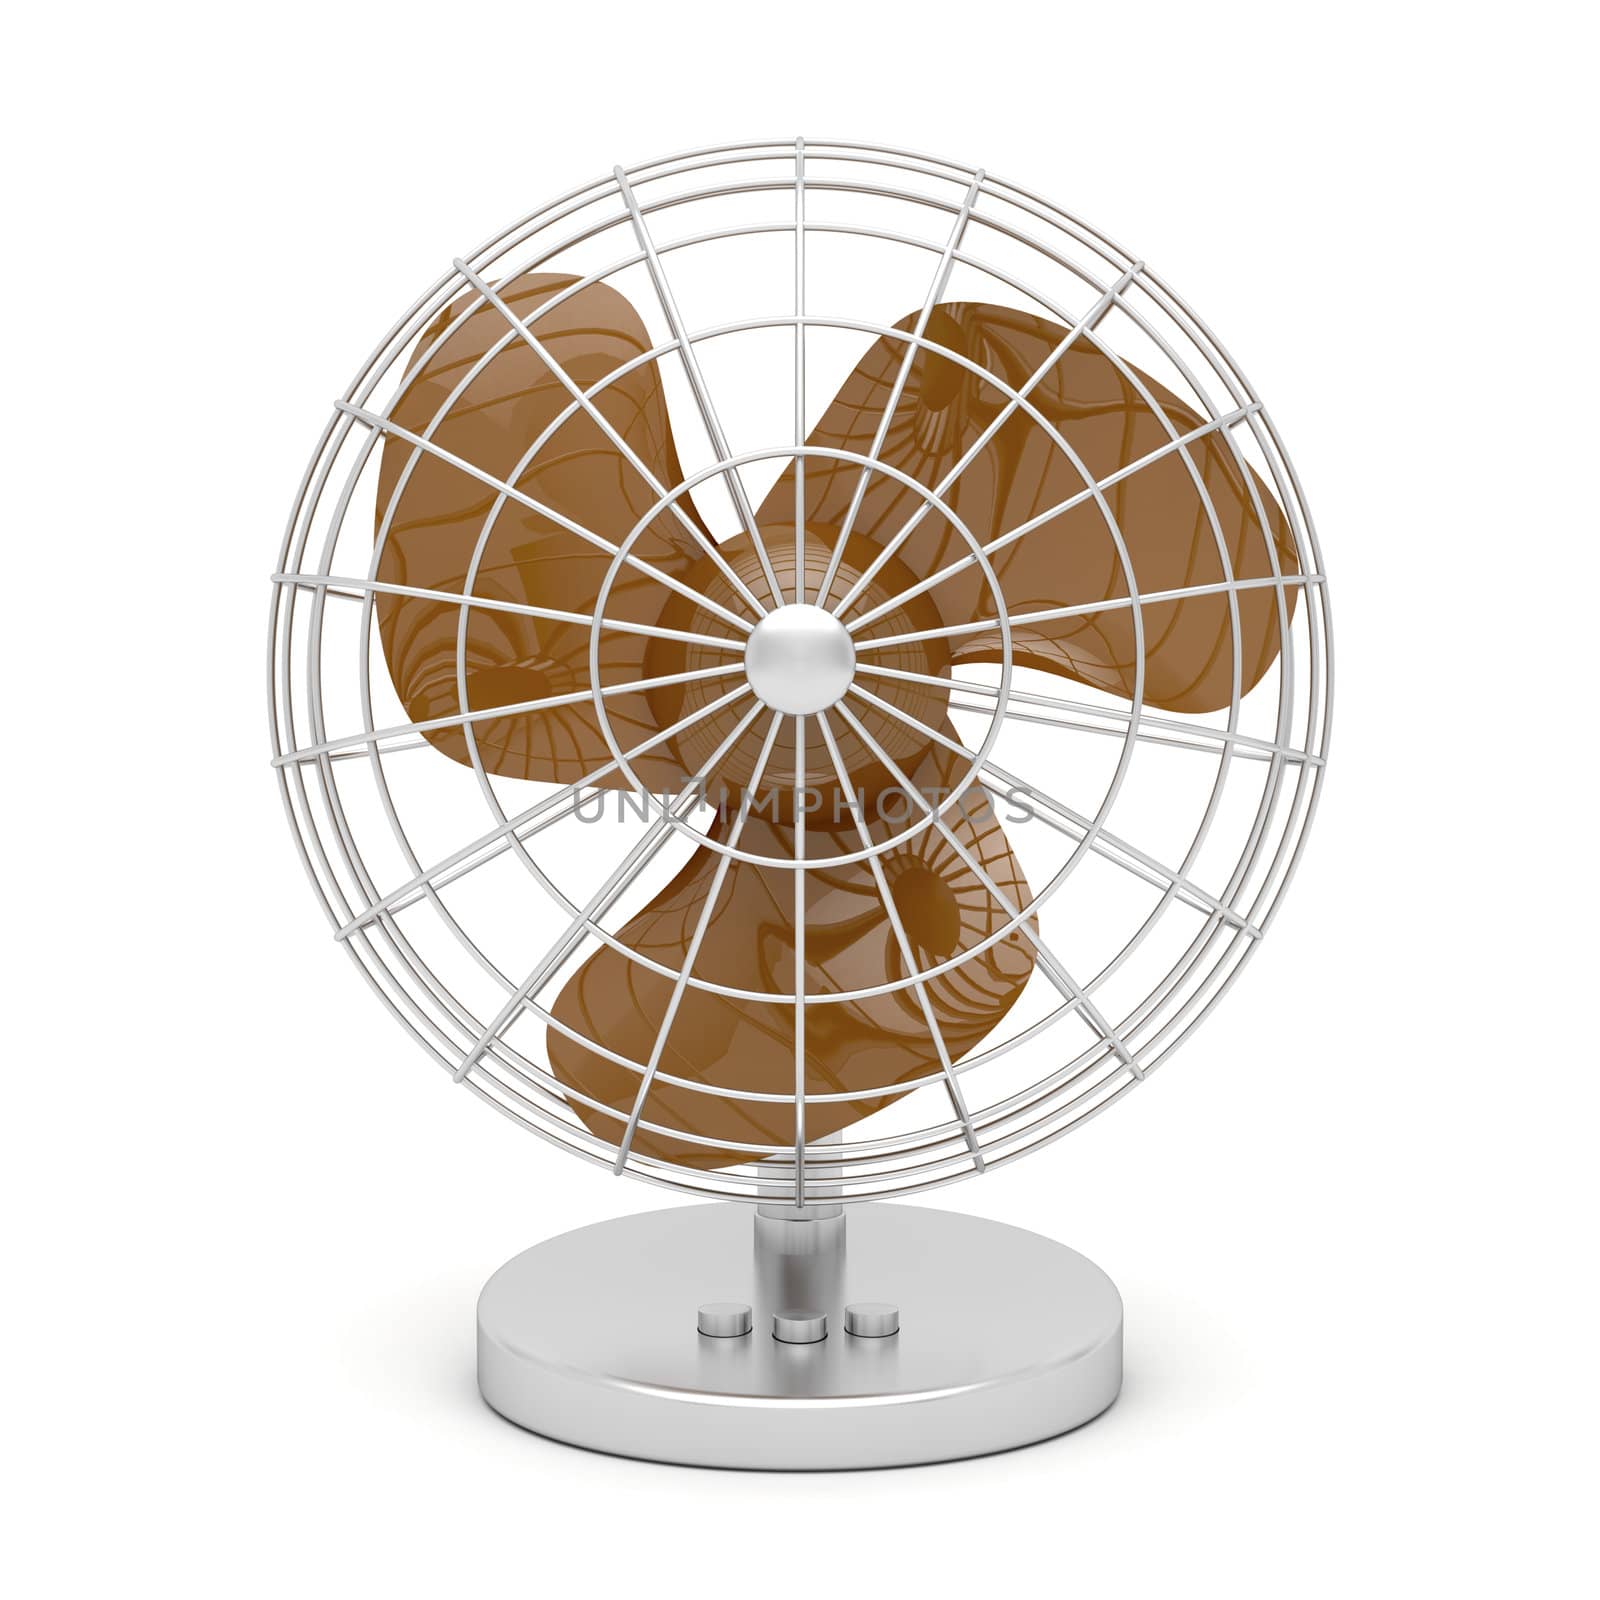 Electric fan by magraphics